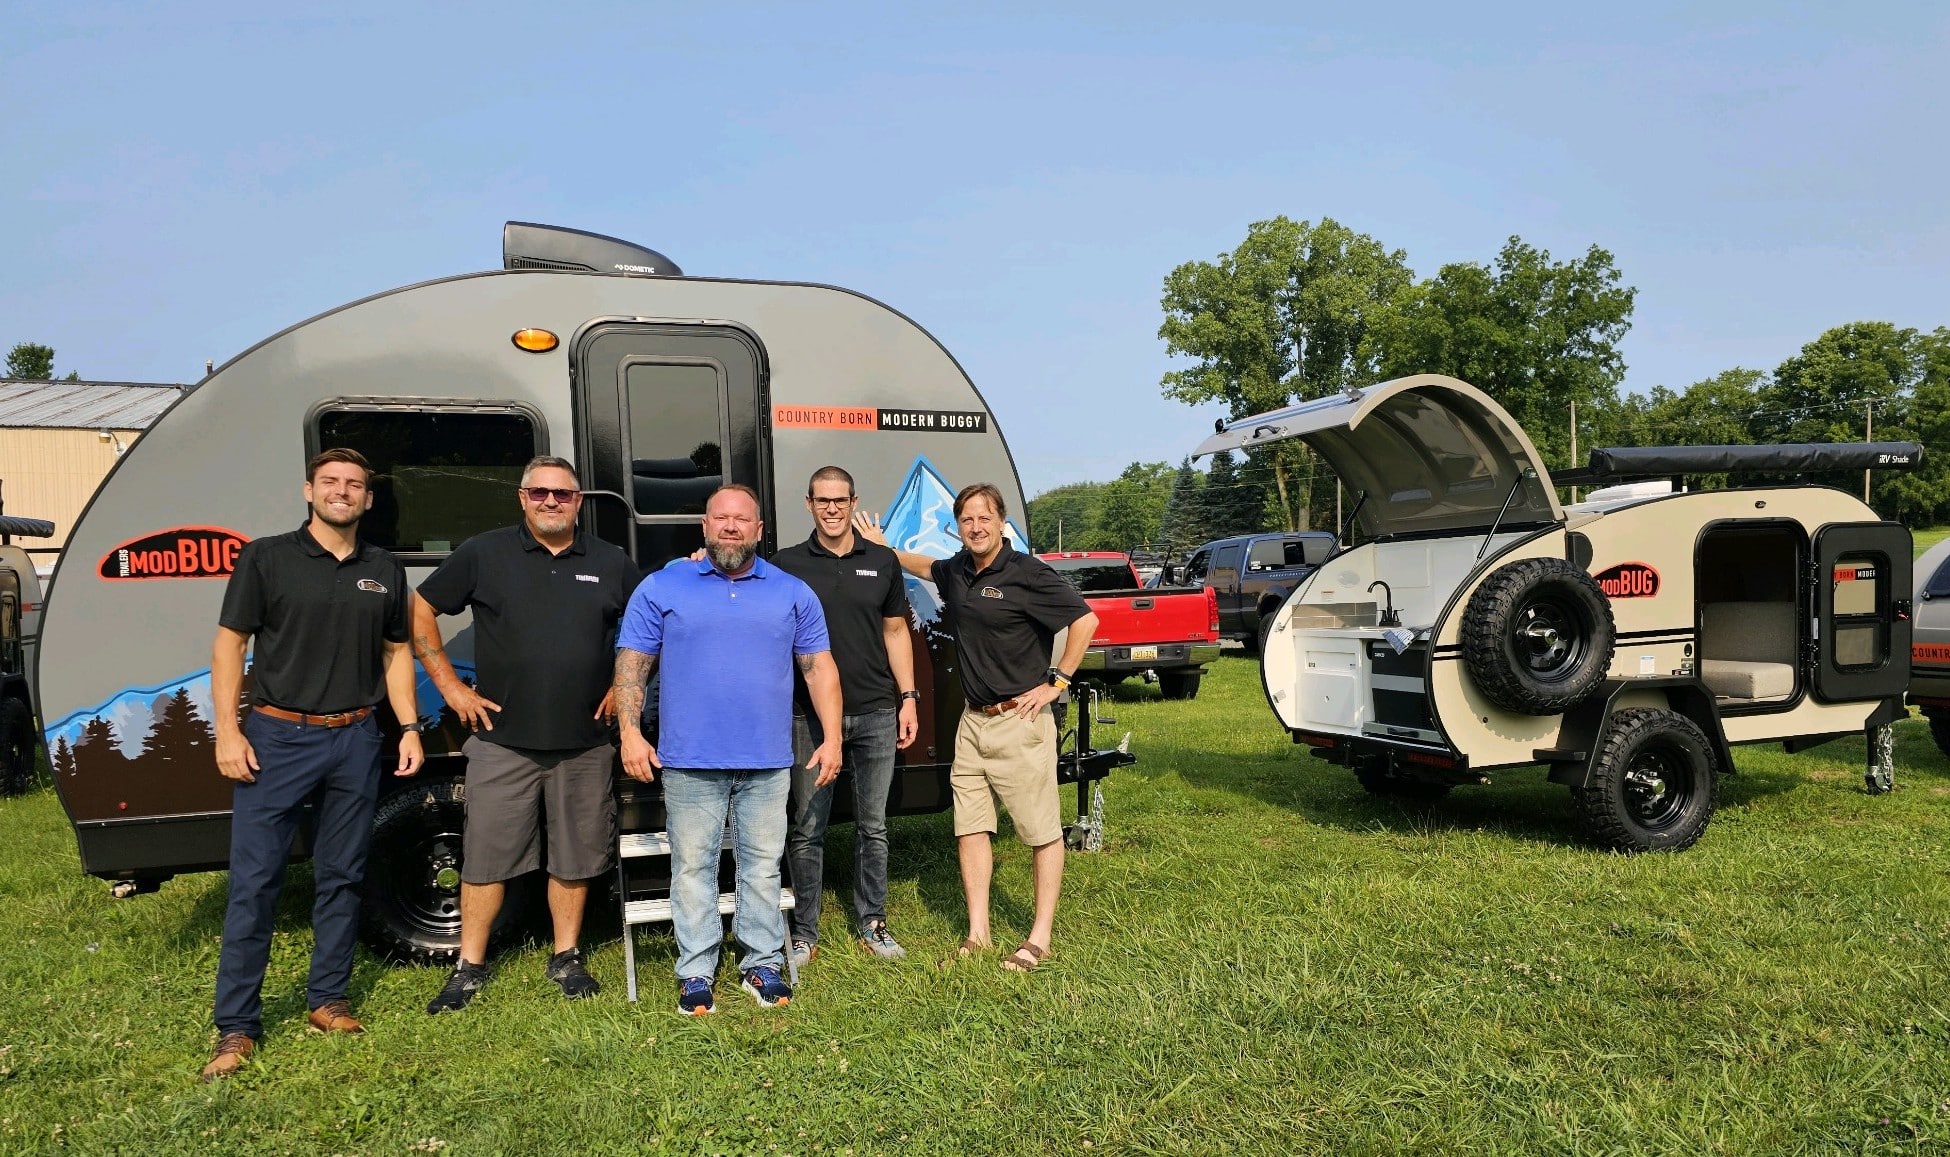 Modern Buggy Announces Partnership with Timbren, Dexter – RVBusiness – Breaking RV Industry News